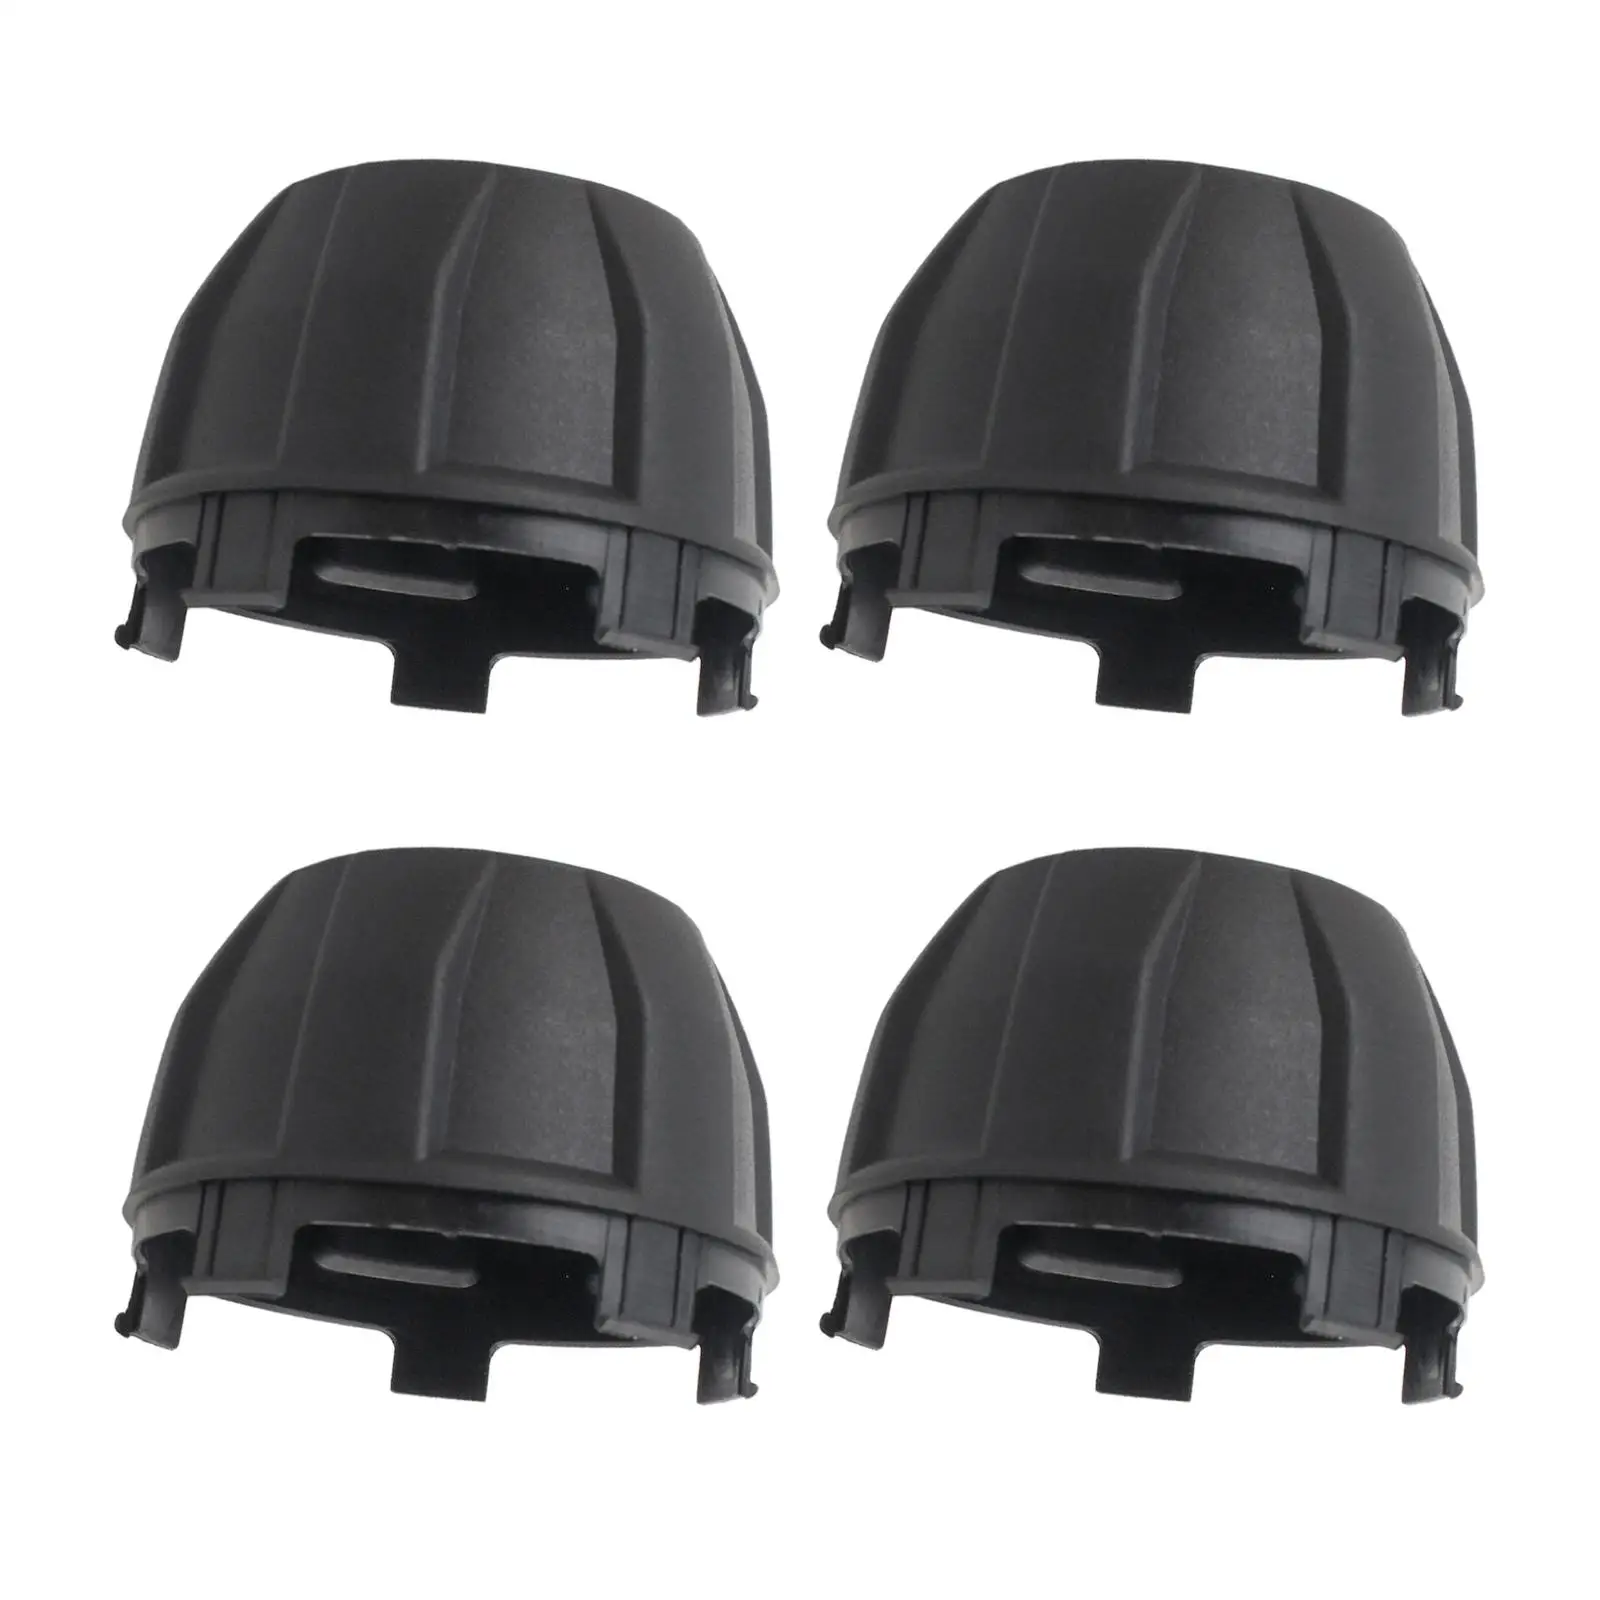 4 Pieces Tire Wheel Hub Caps Motorcycle Easy to Install Wheel Cap Cover Assembly for Kawasaki Repairing Accessory Premium